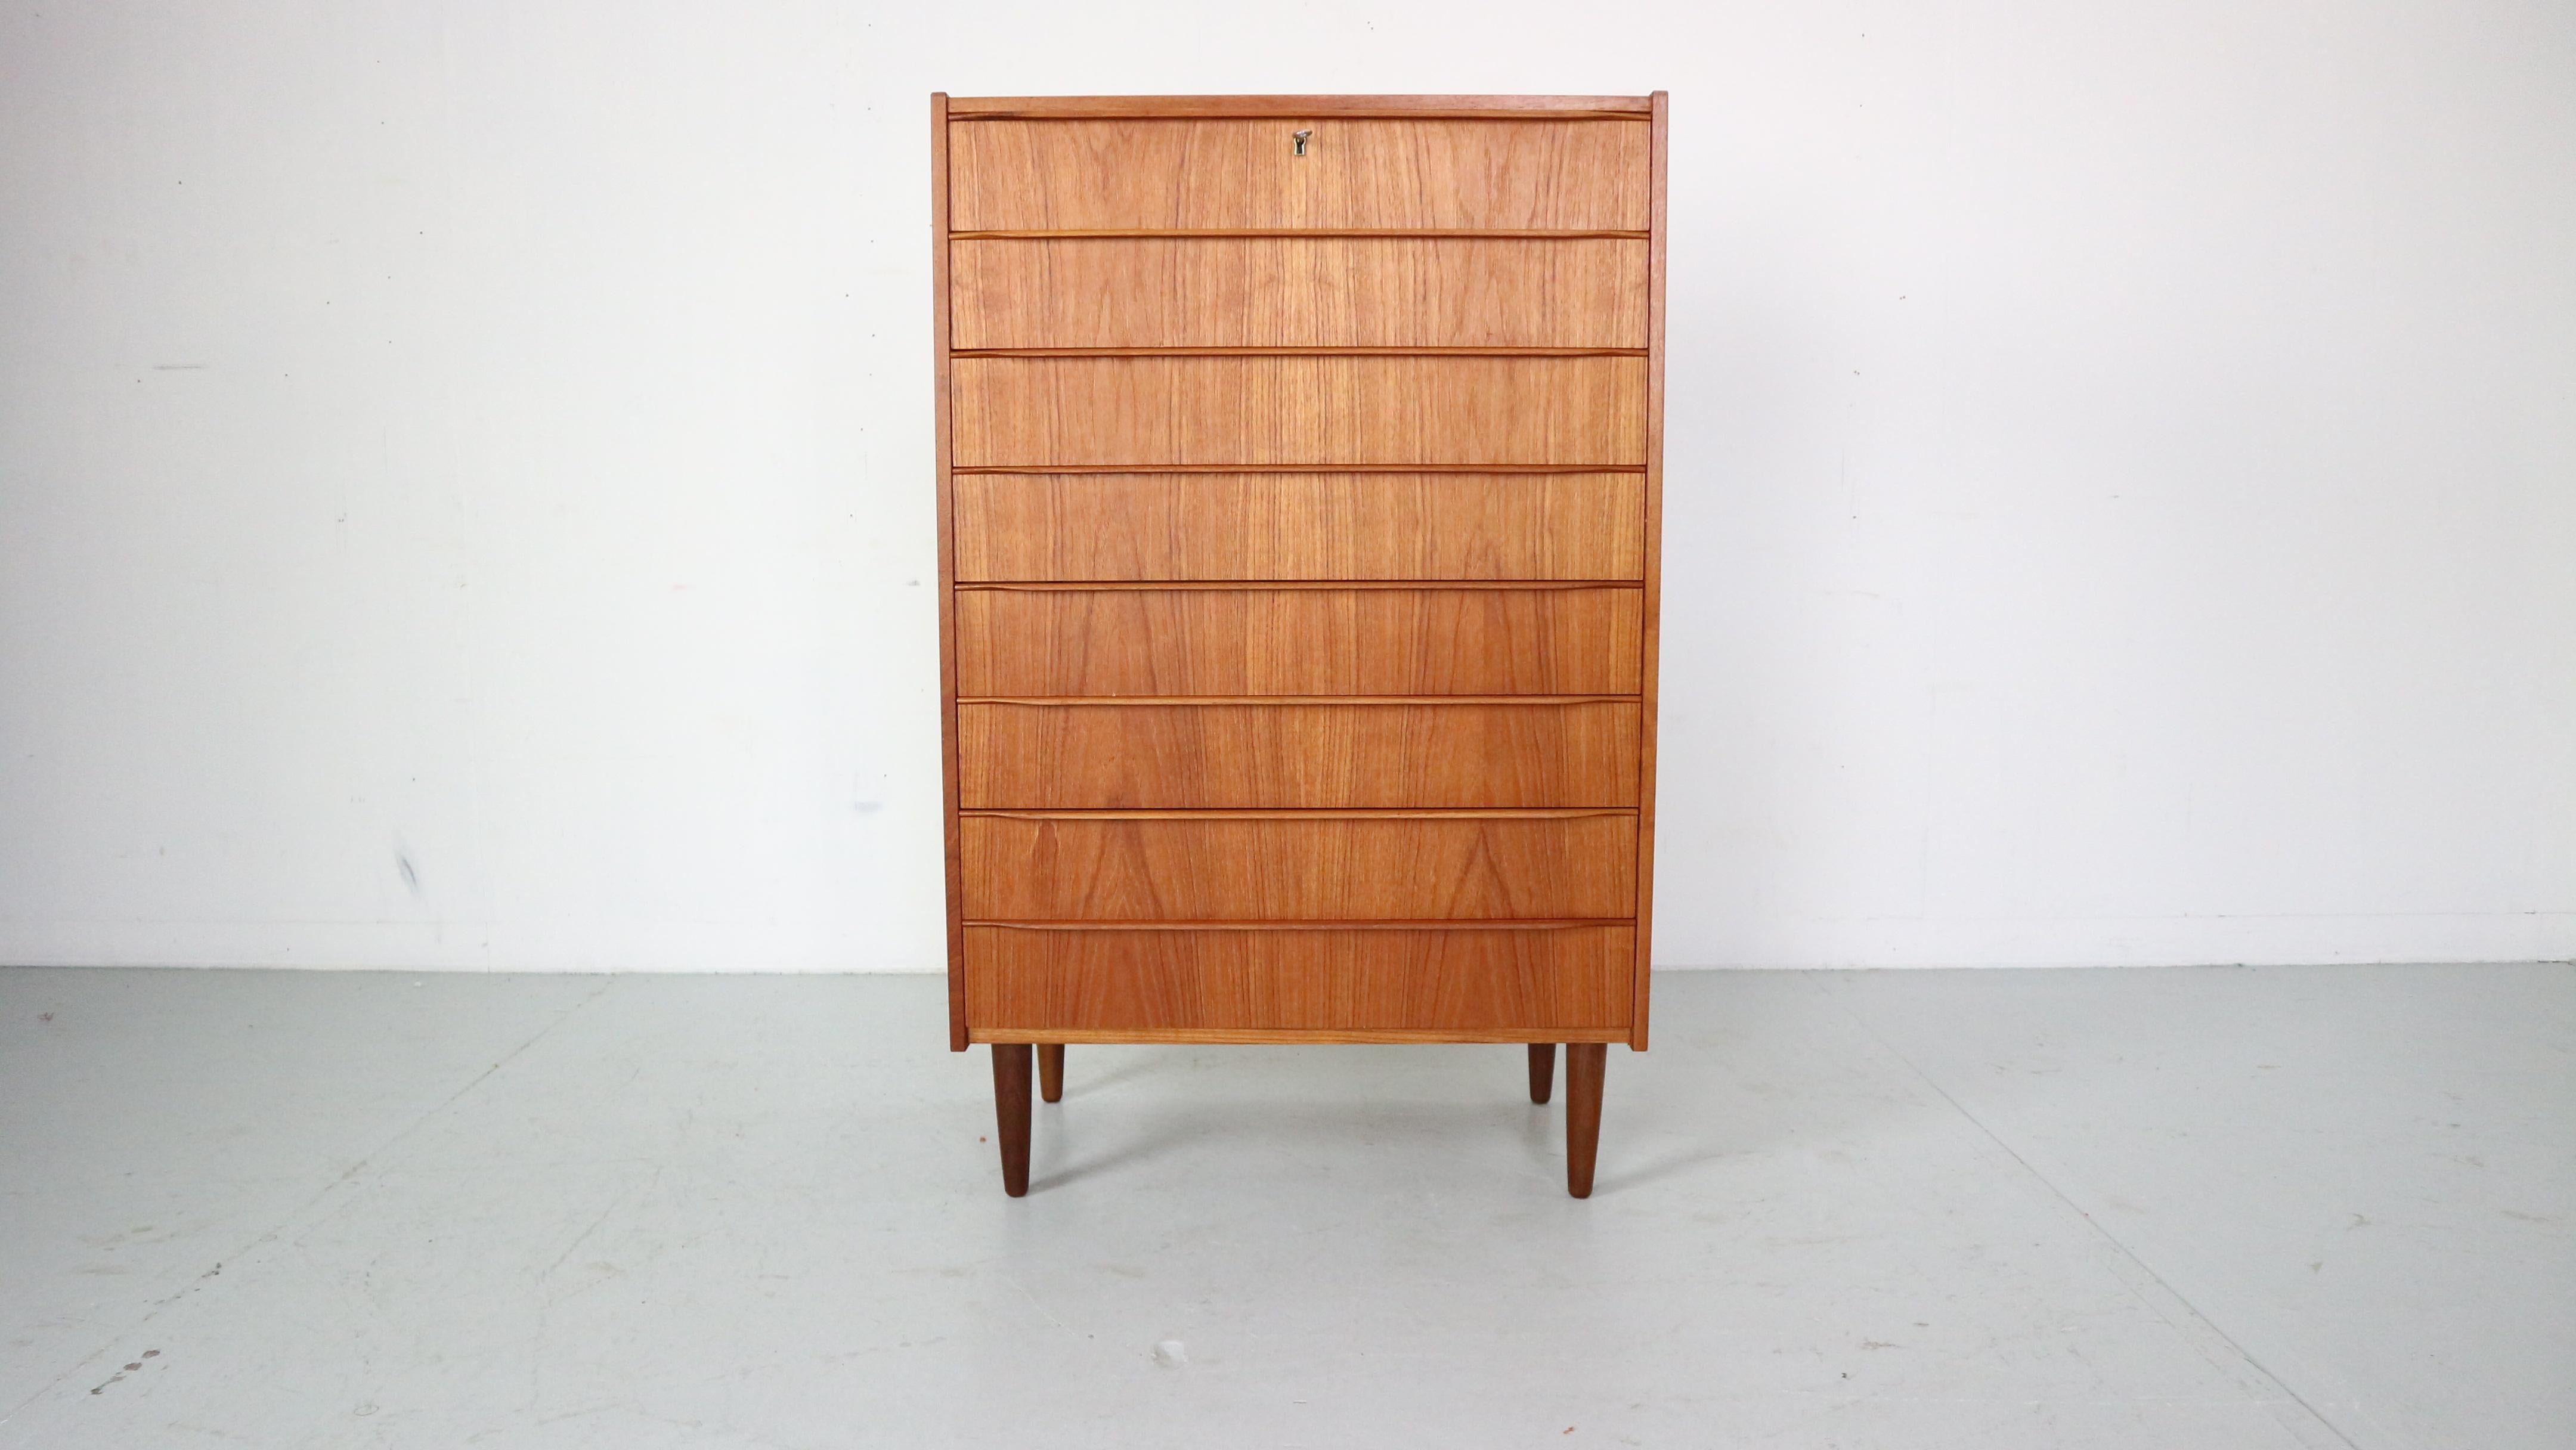 Mid- Century modern period chest of 8 drawers or tallboy cabinet made in 1960's Denmark.

Made of teak wood veneer. Elegant handles.
Comes with the working lock&key.

The cabinet is in a good vintage condition.
It has been professionally cleaned and